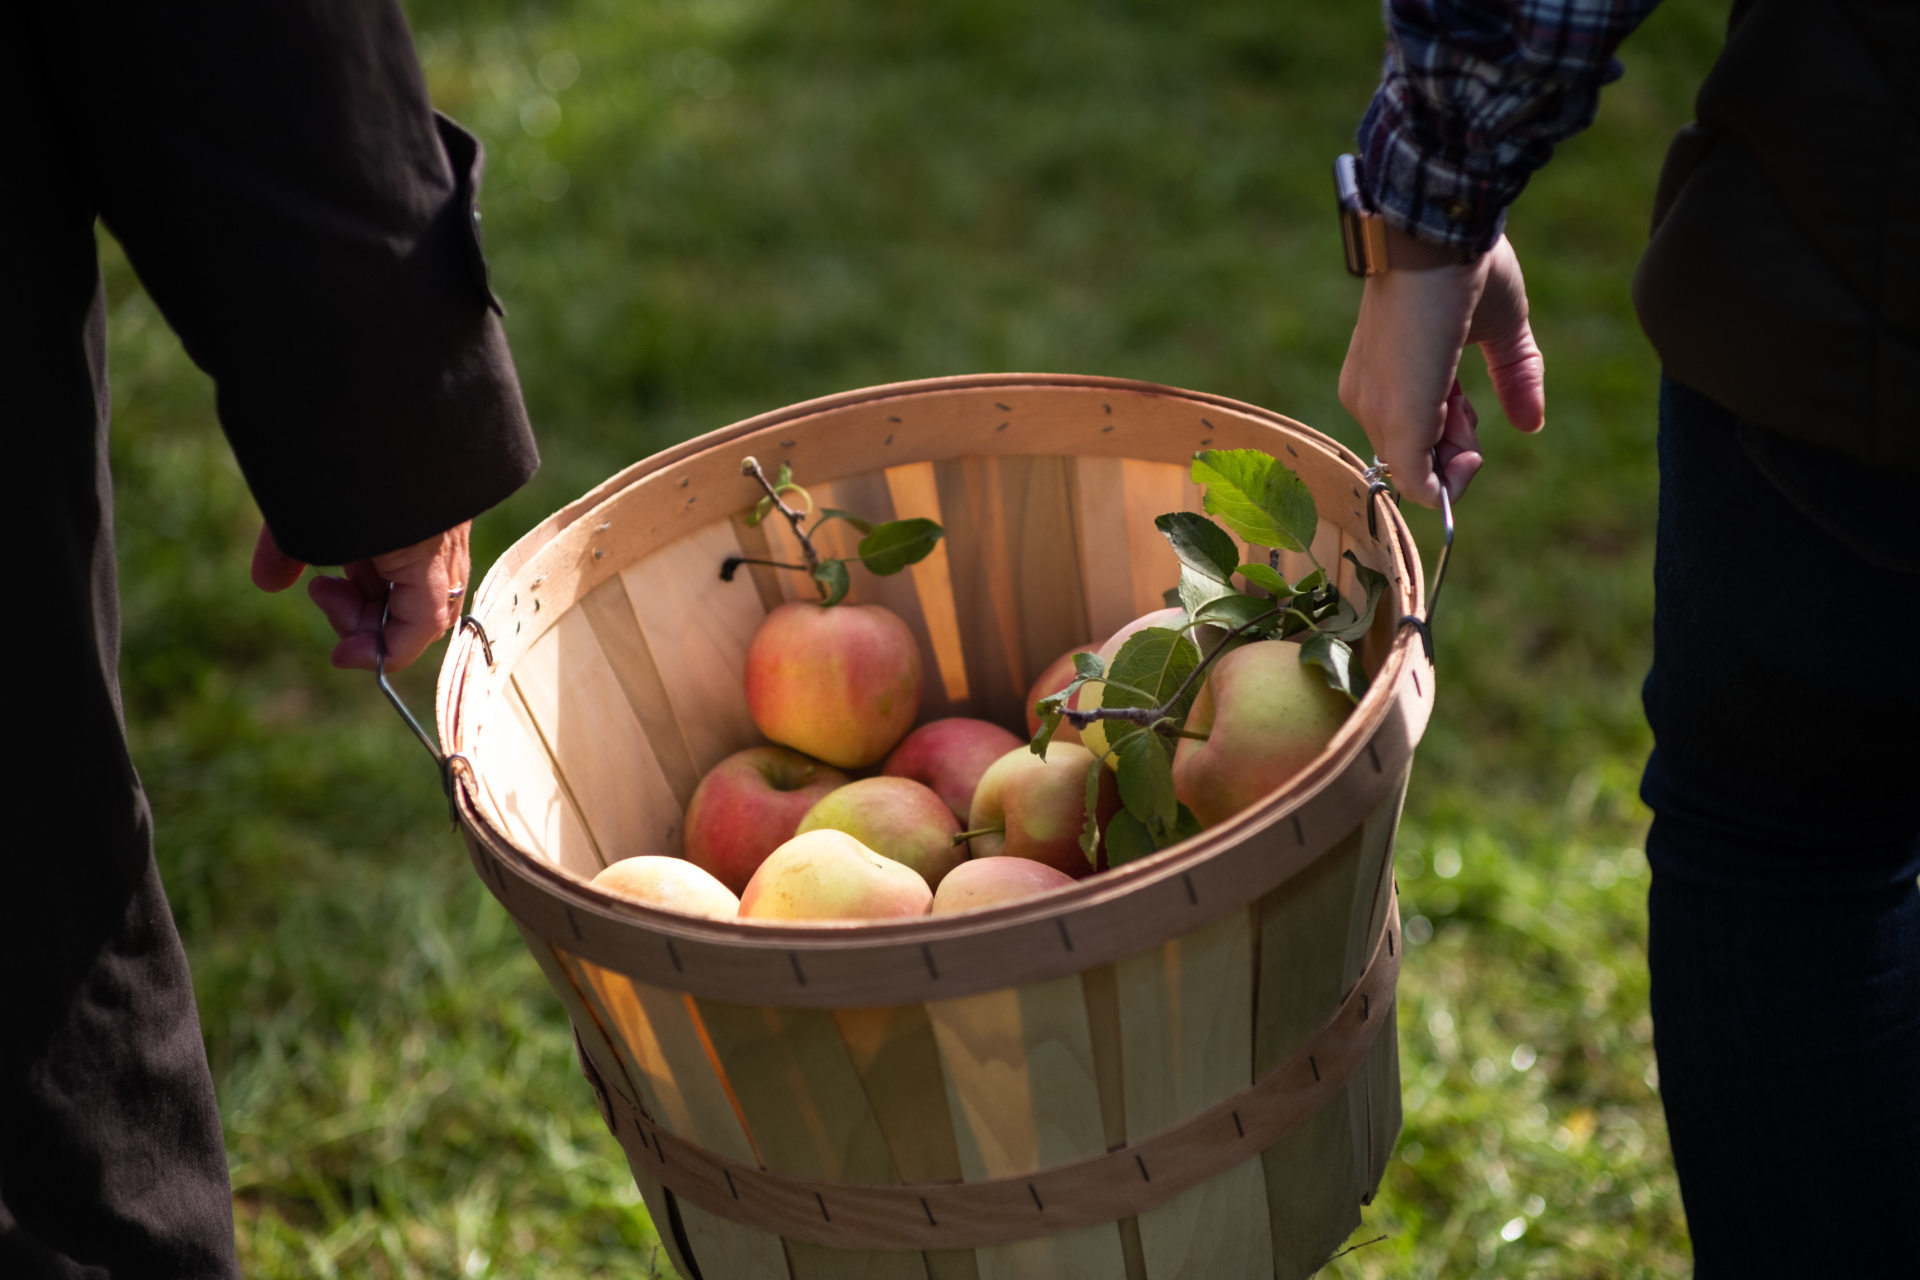 Two people carrying a basket of freshly picked apples together